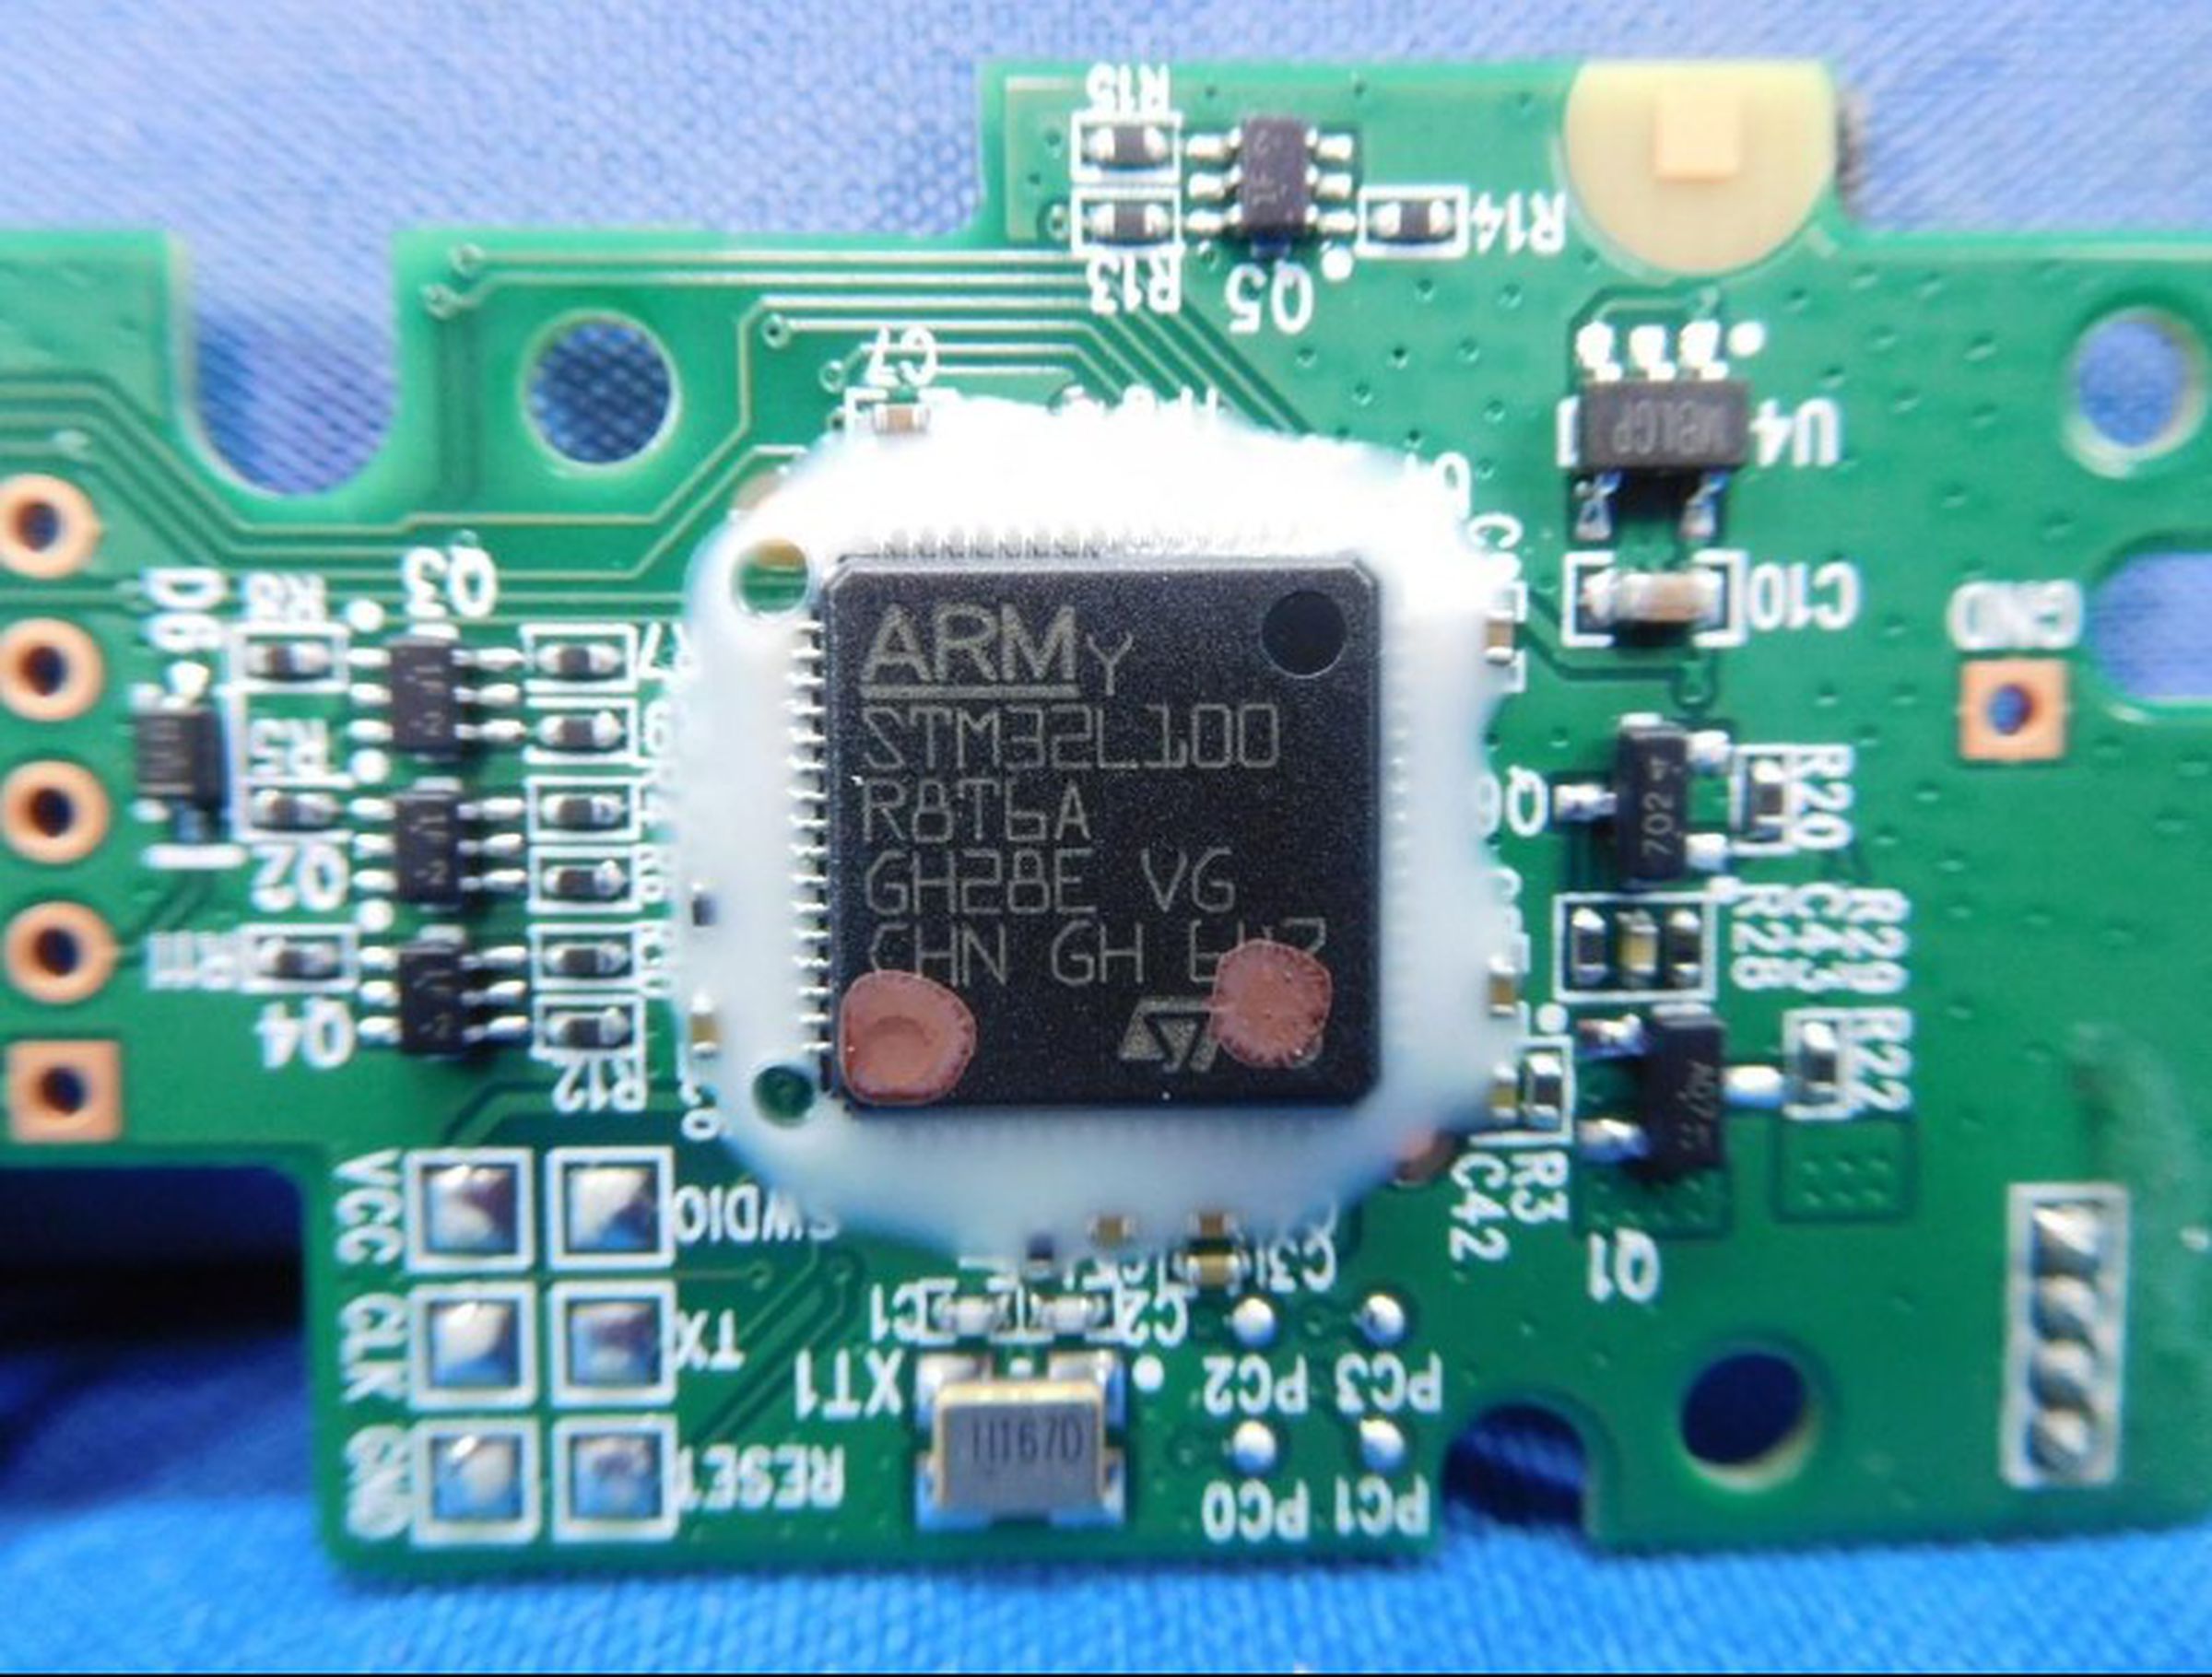 The Arm chip inside the Logitech Powerplay’s receiver module.